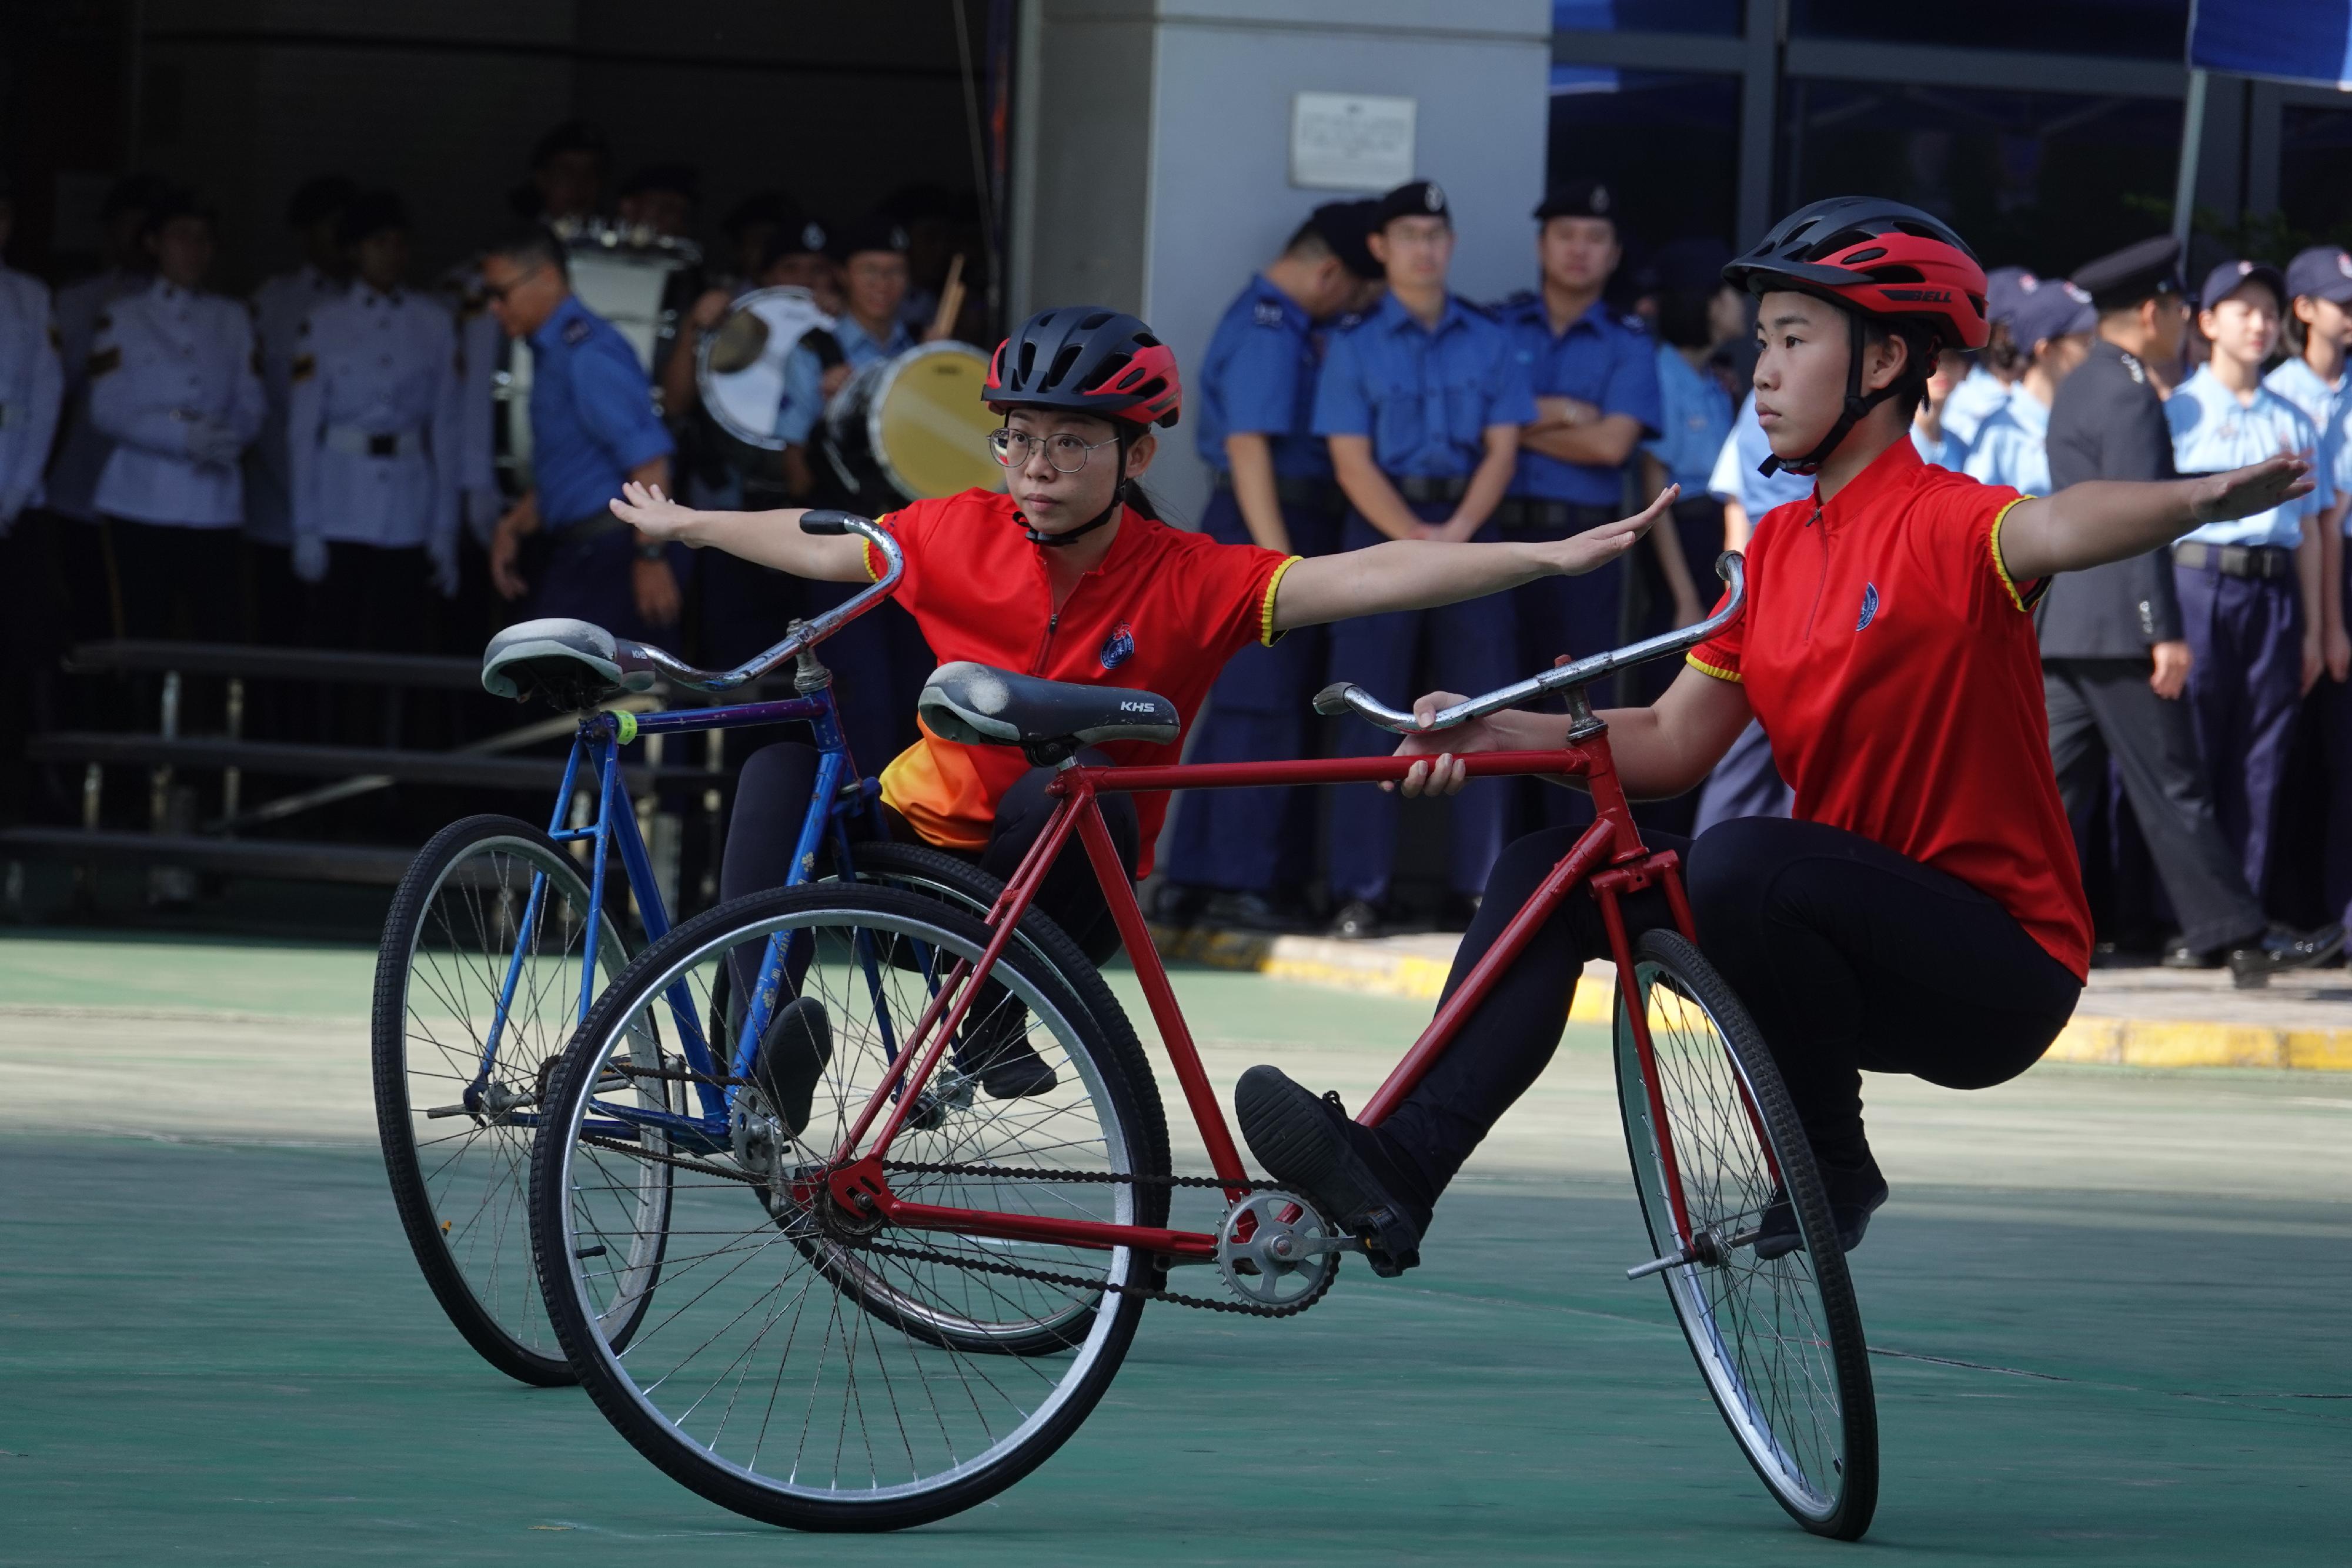 The Civil Aid Service Cadet Corps held the 139th New Cadets Passing-out Parade today (November 25). Photo shows the Cadet Corps Bicycle Demonstration Team performing after the parade.